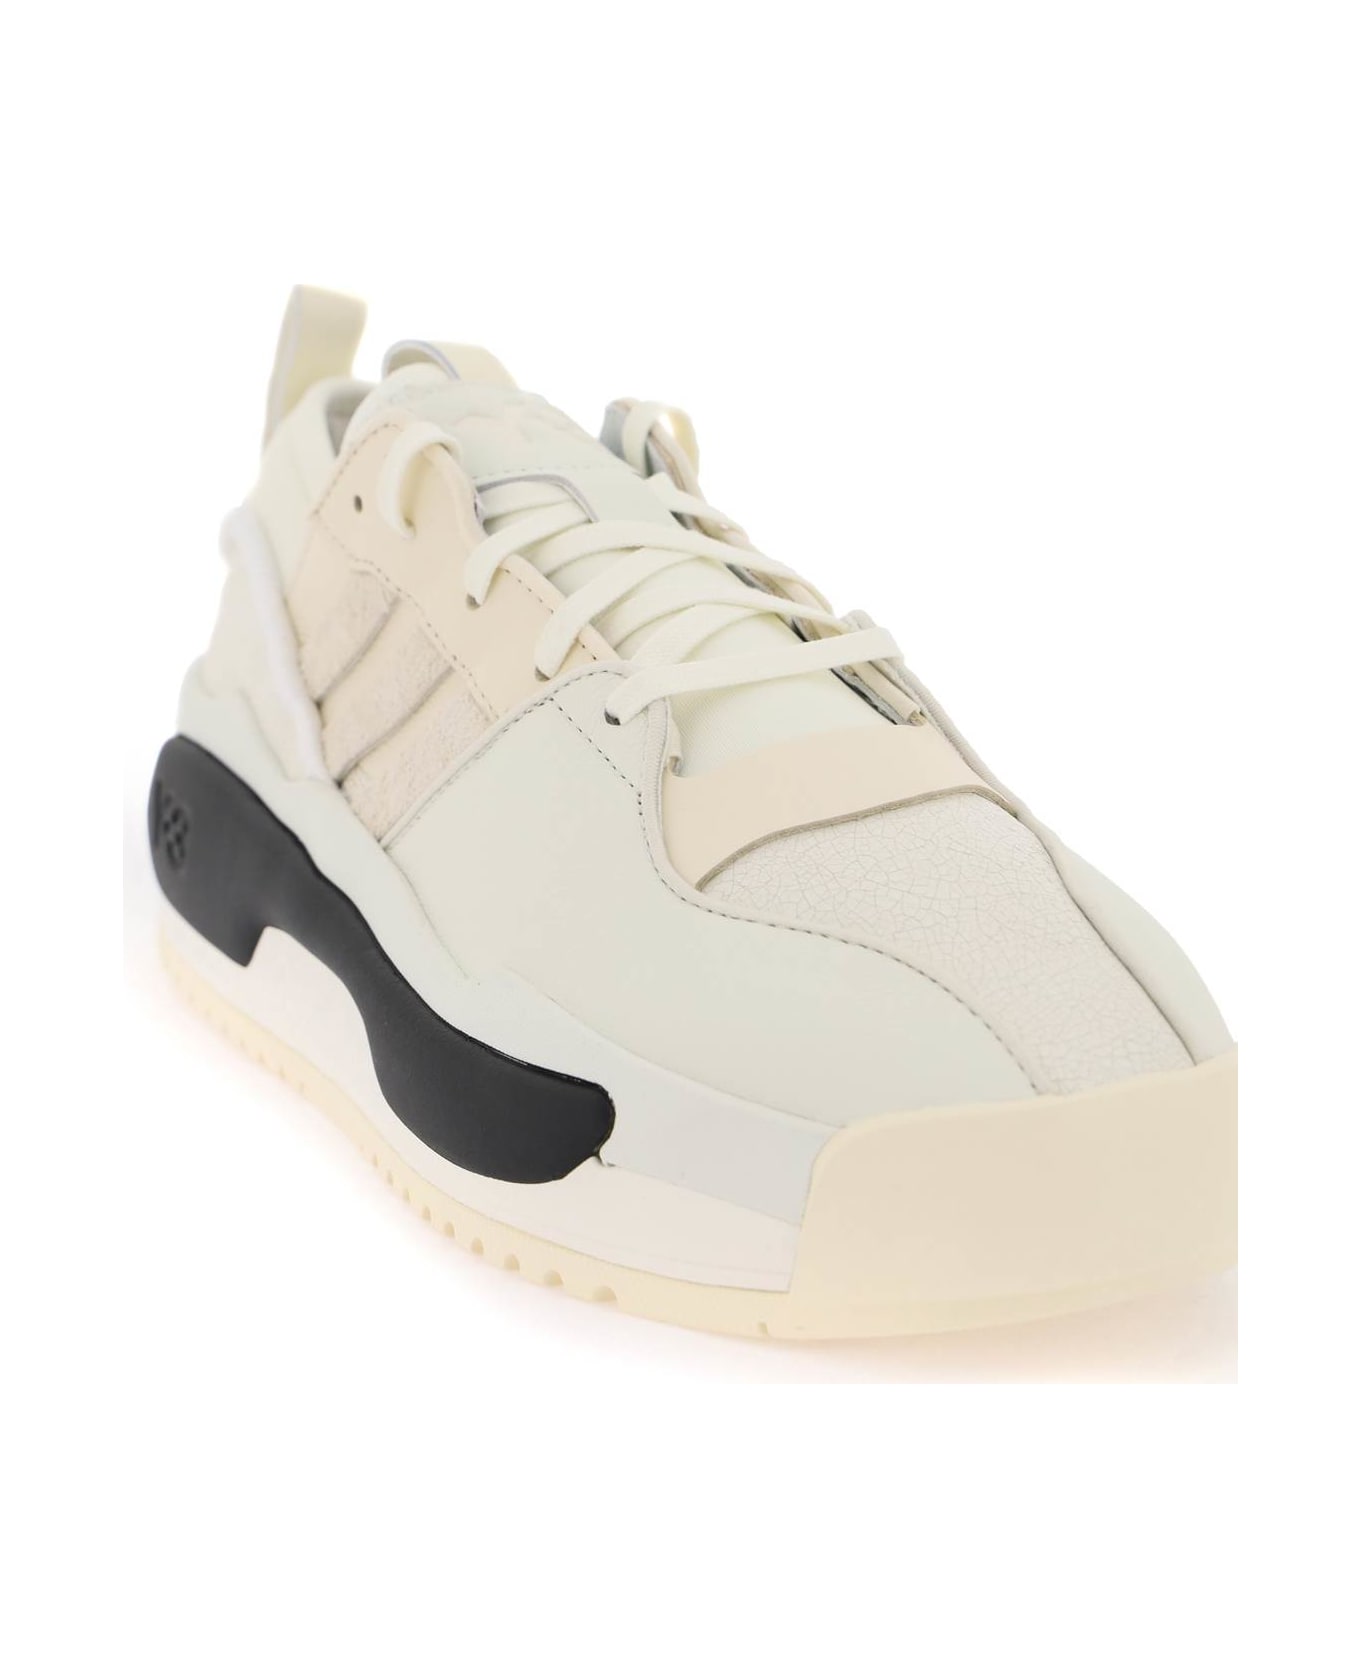 Y-3 Rivalry Sneakers - OFF WHITE WONDER WHITE (White) スニーカー